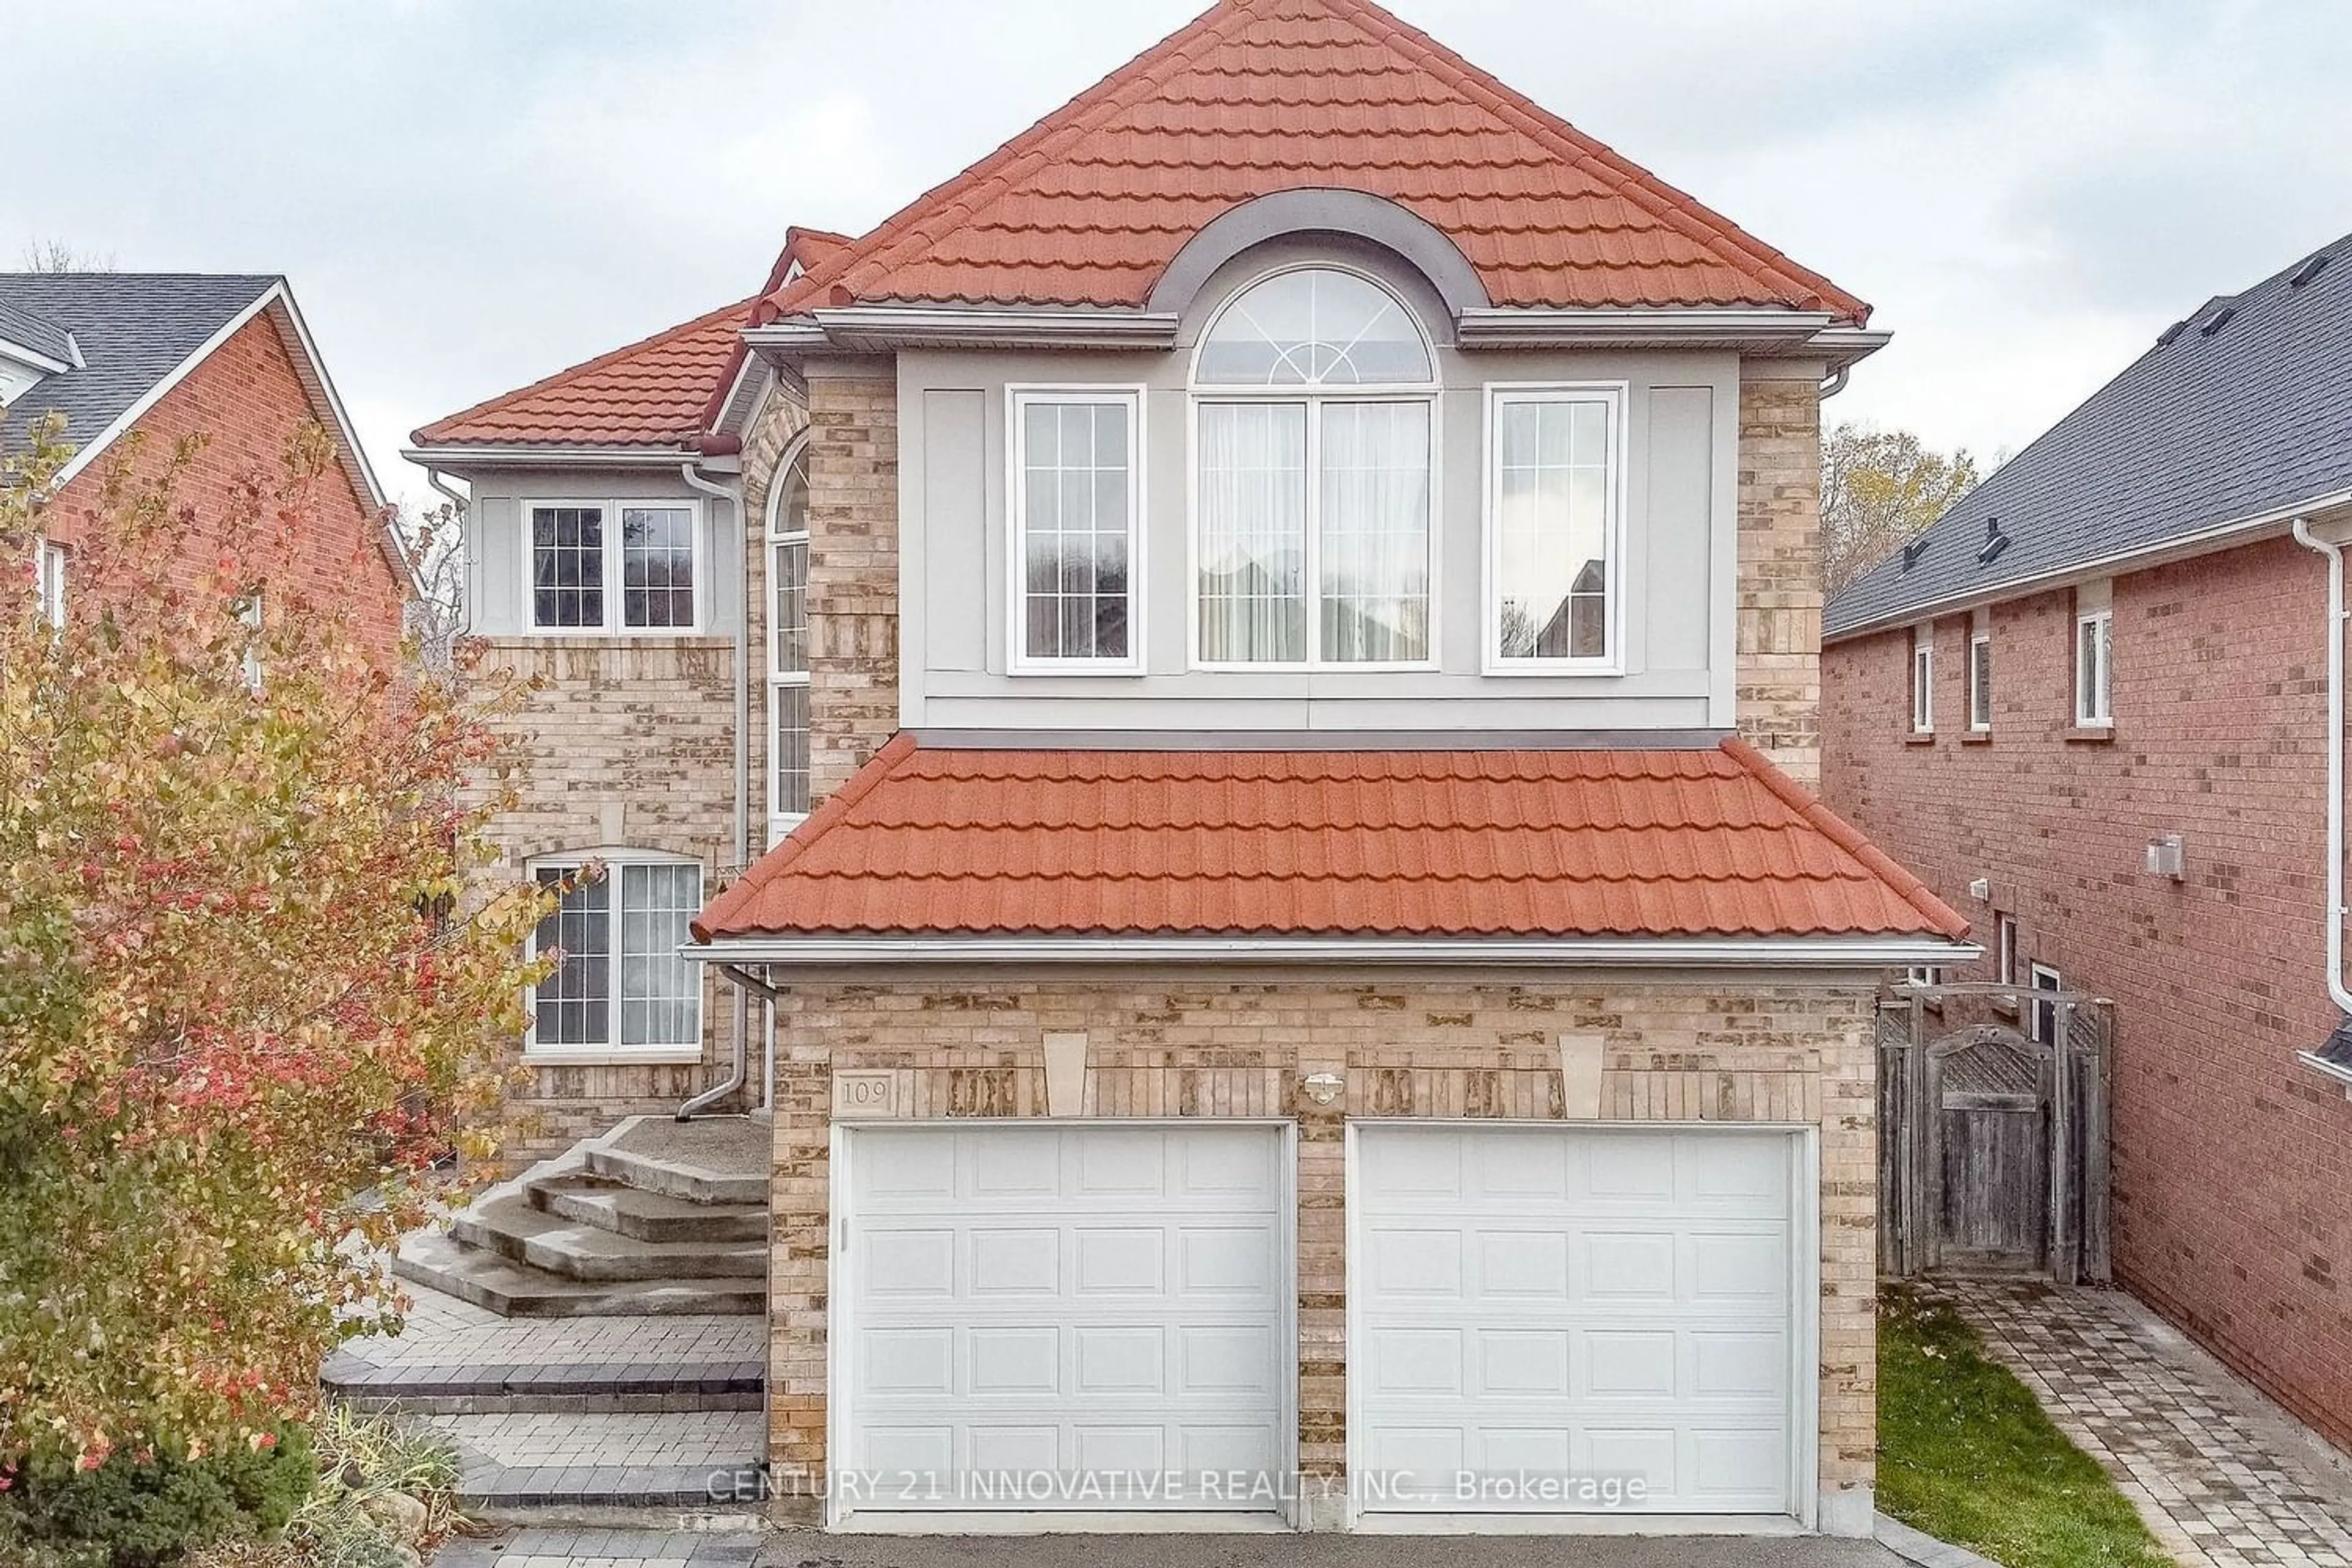 Home with brick exterior material for 109 Gartshore Dr, Whitby Ontario L1P 1N8